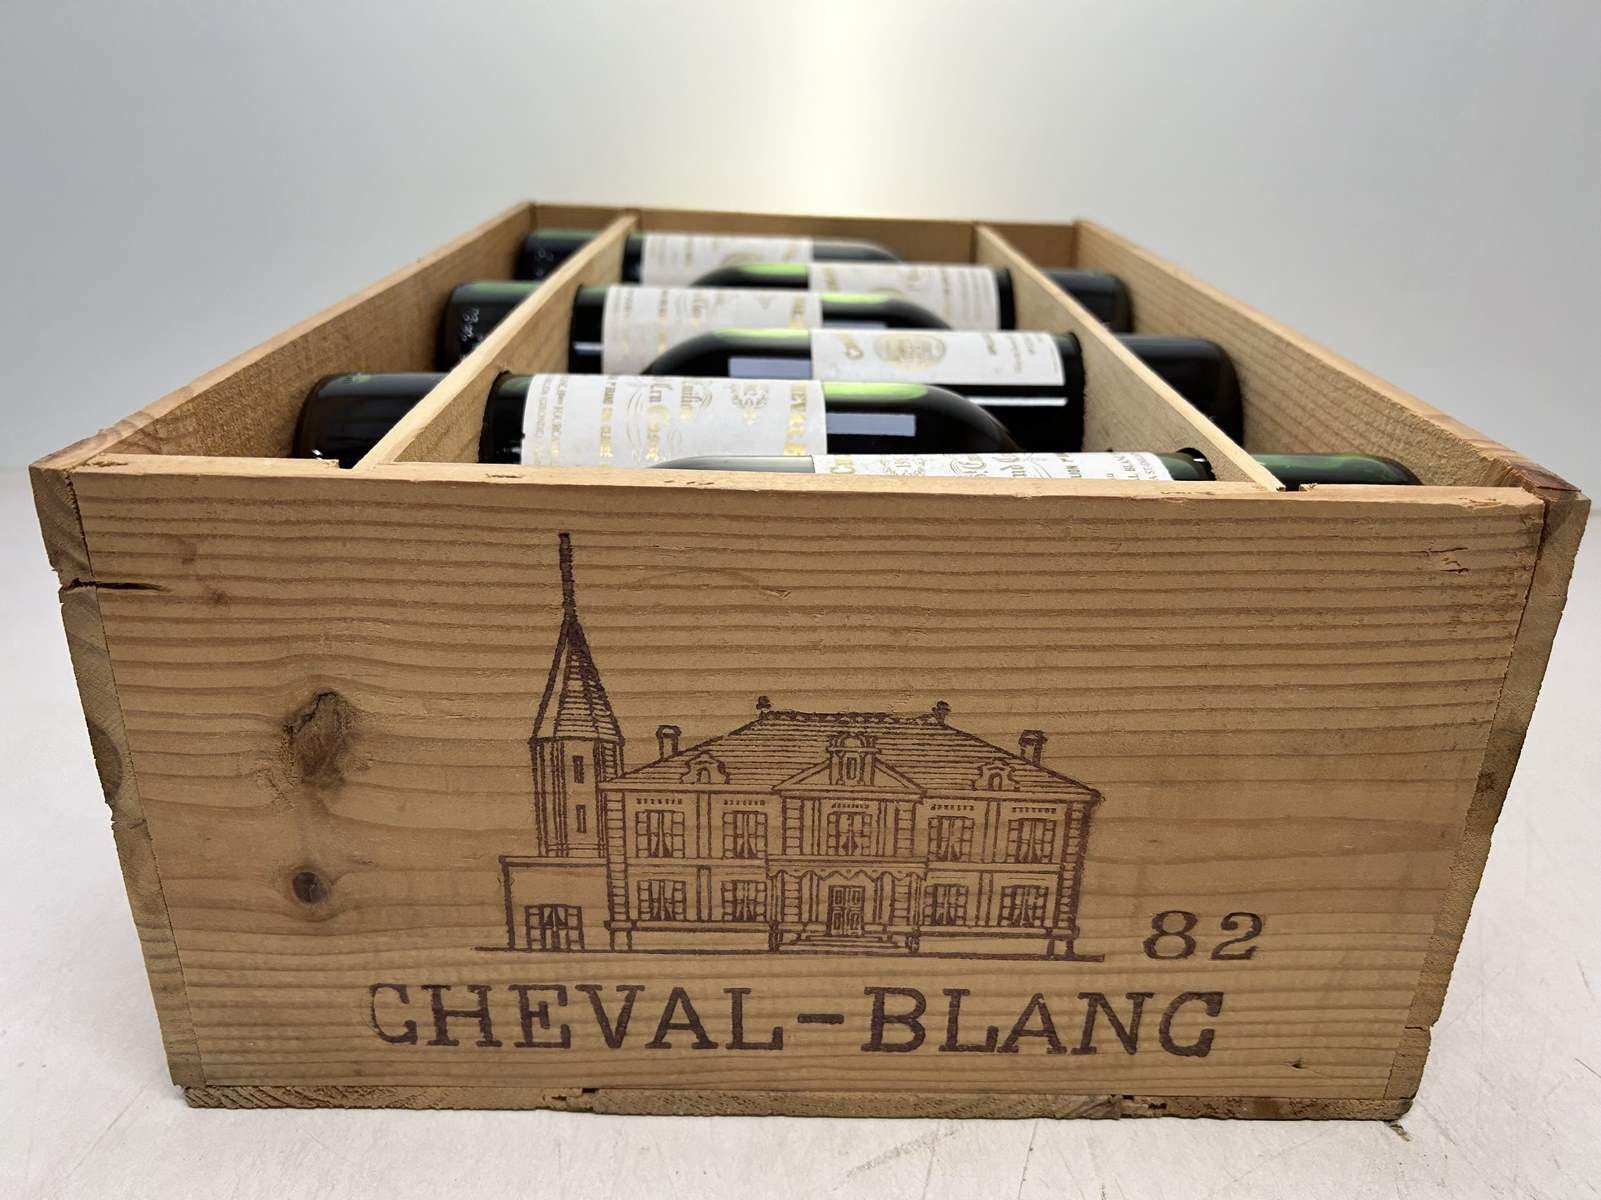 5 cases of Cheval Blanc 1982: